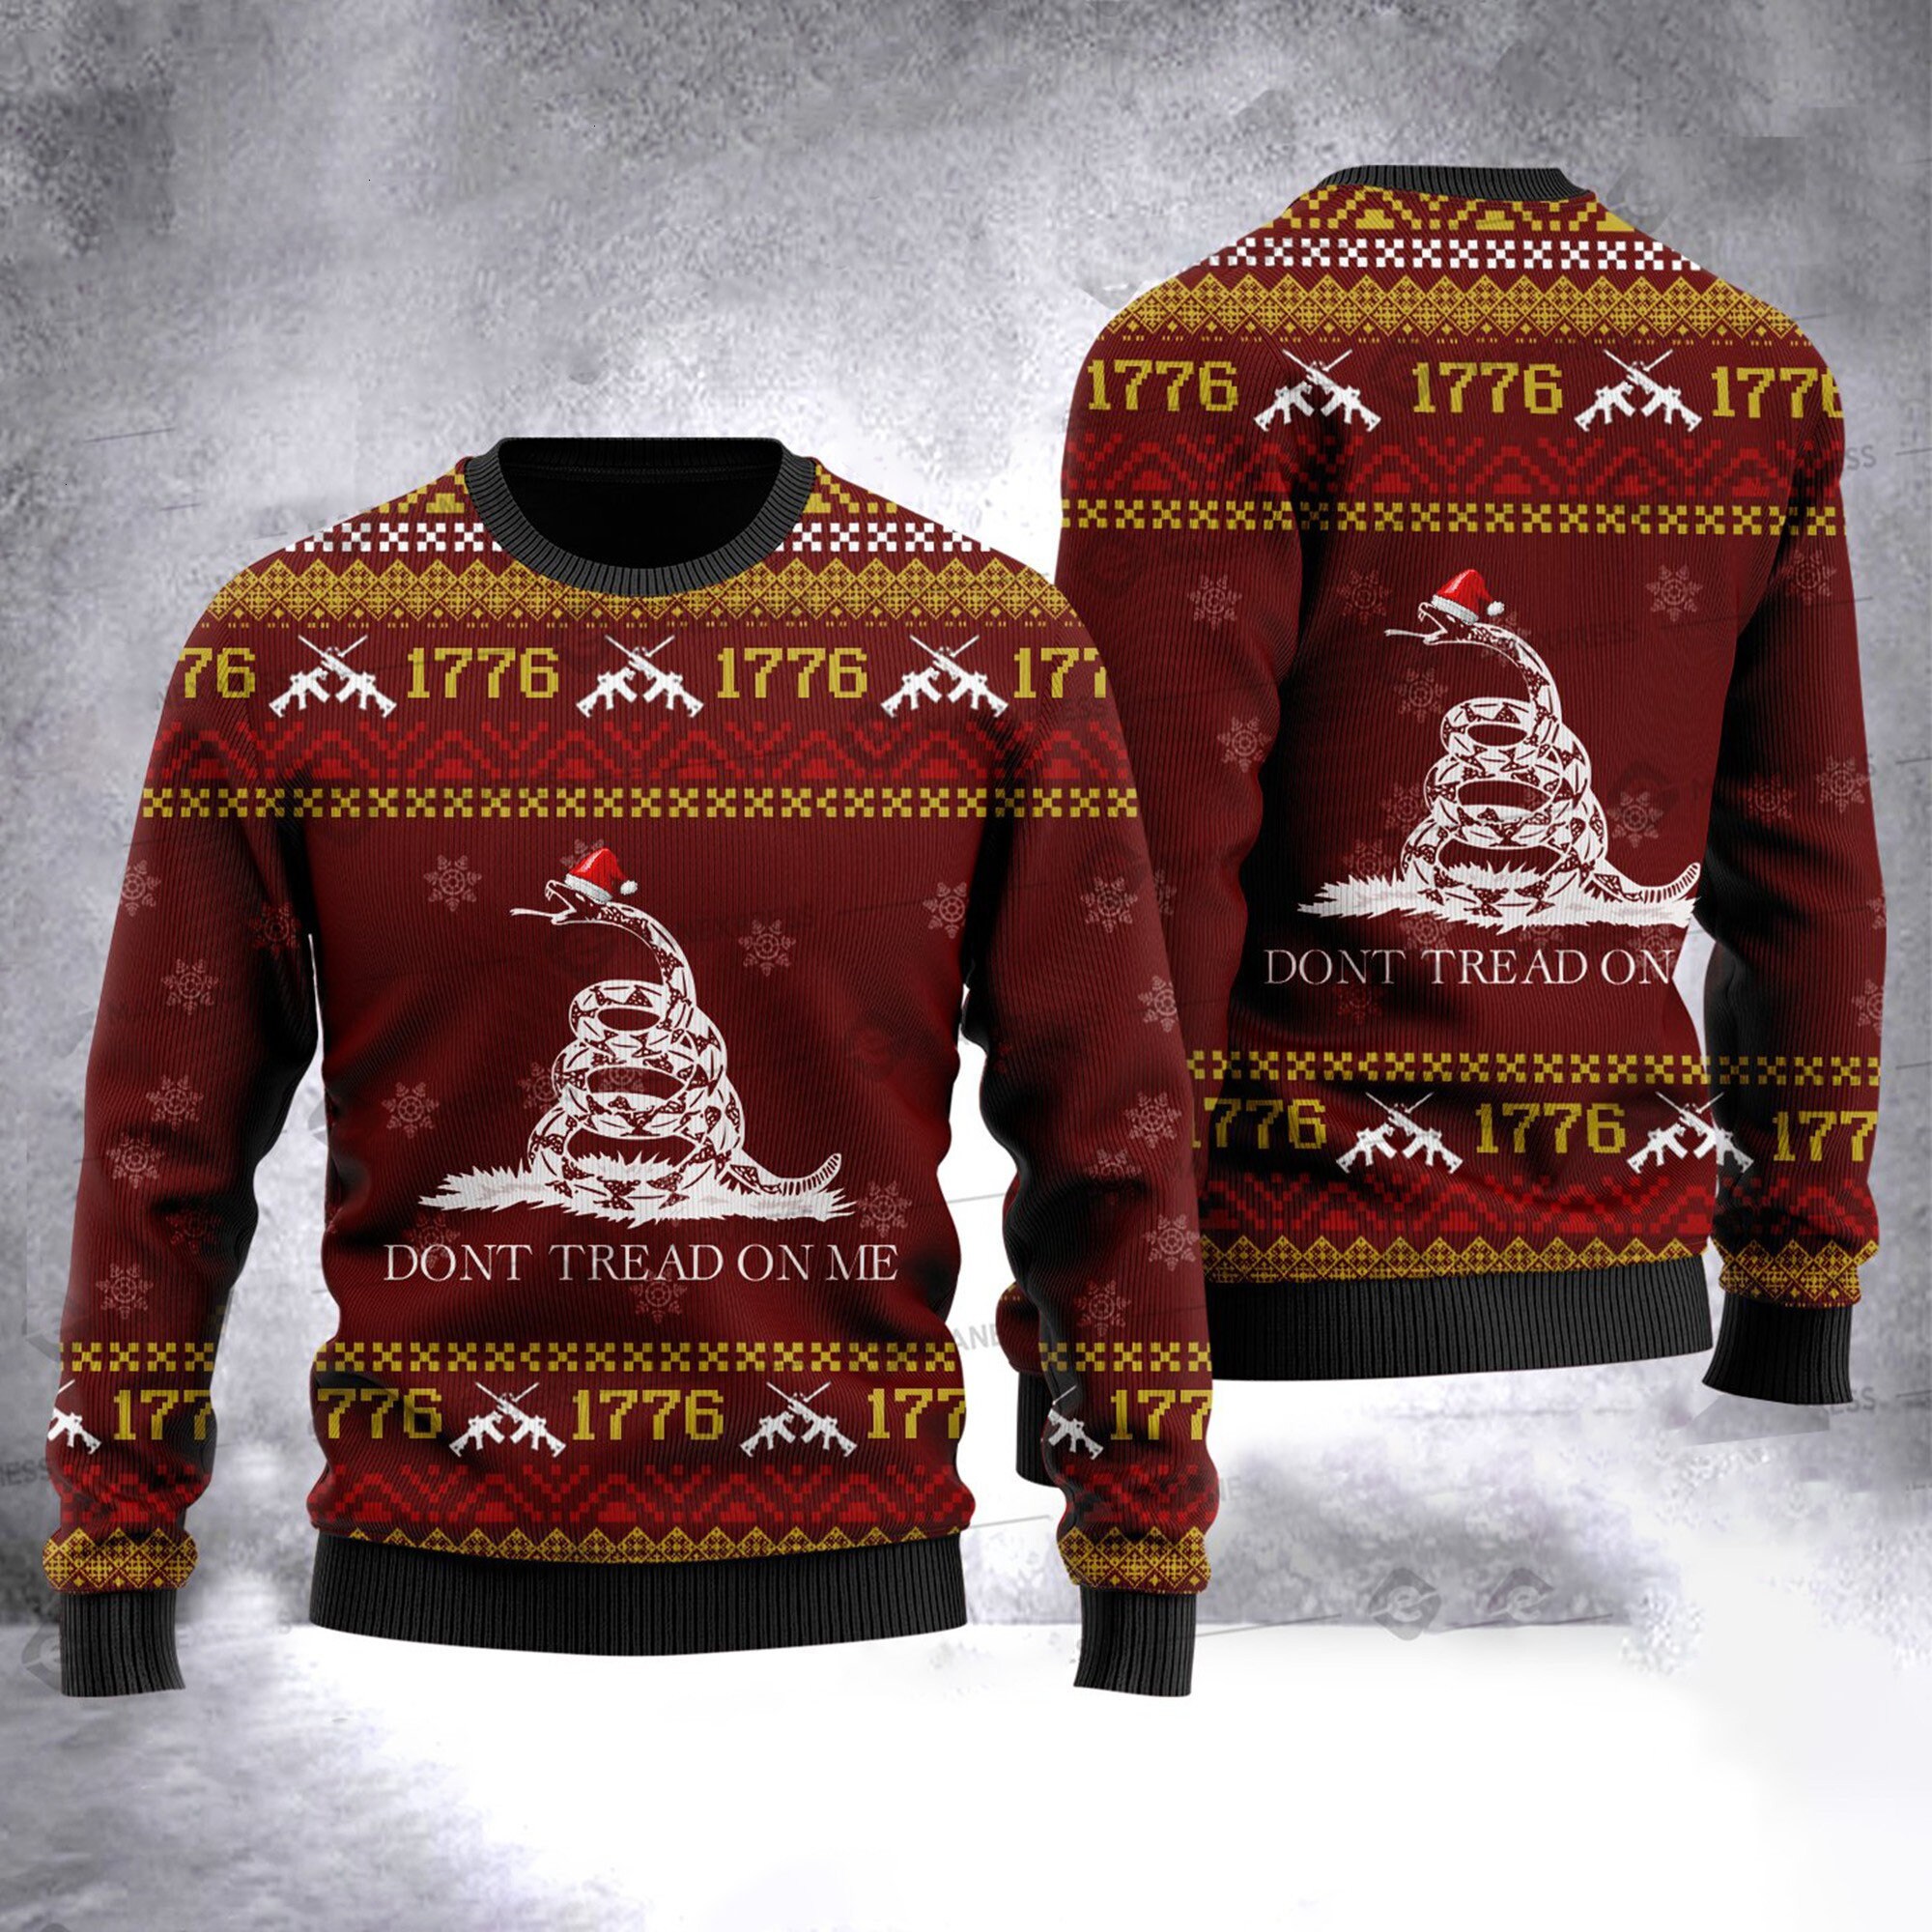 Dont Tread On Me All Over Printed Ugly Christmas 3D Sweater